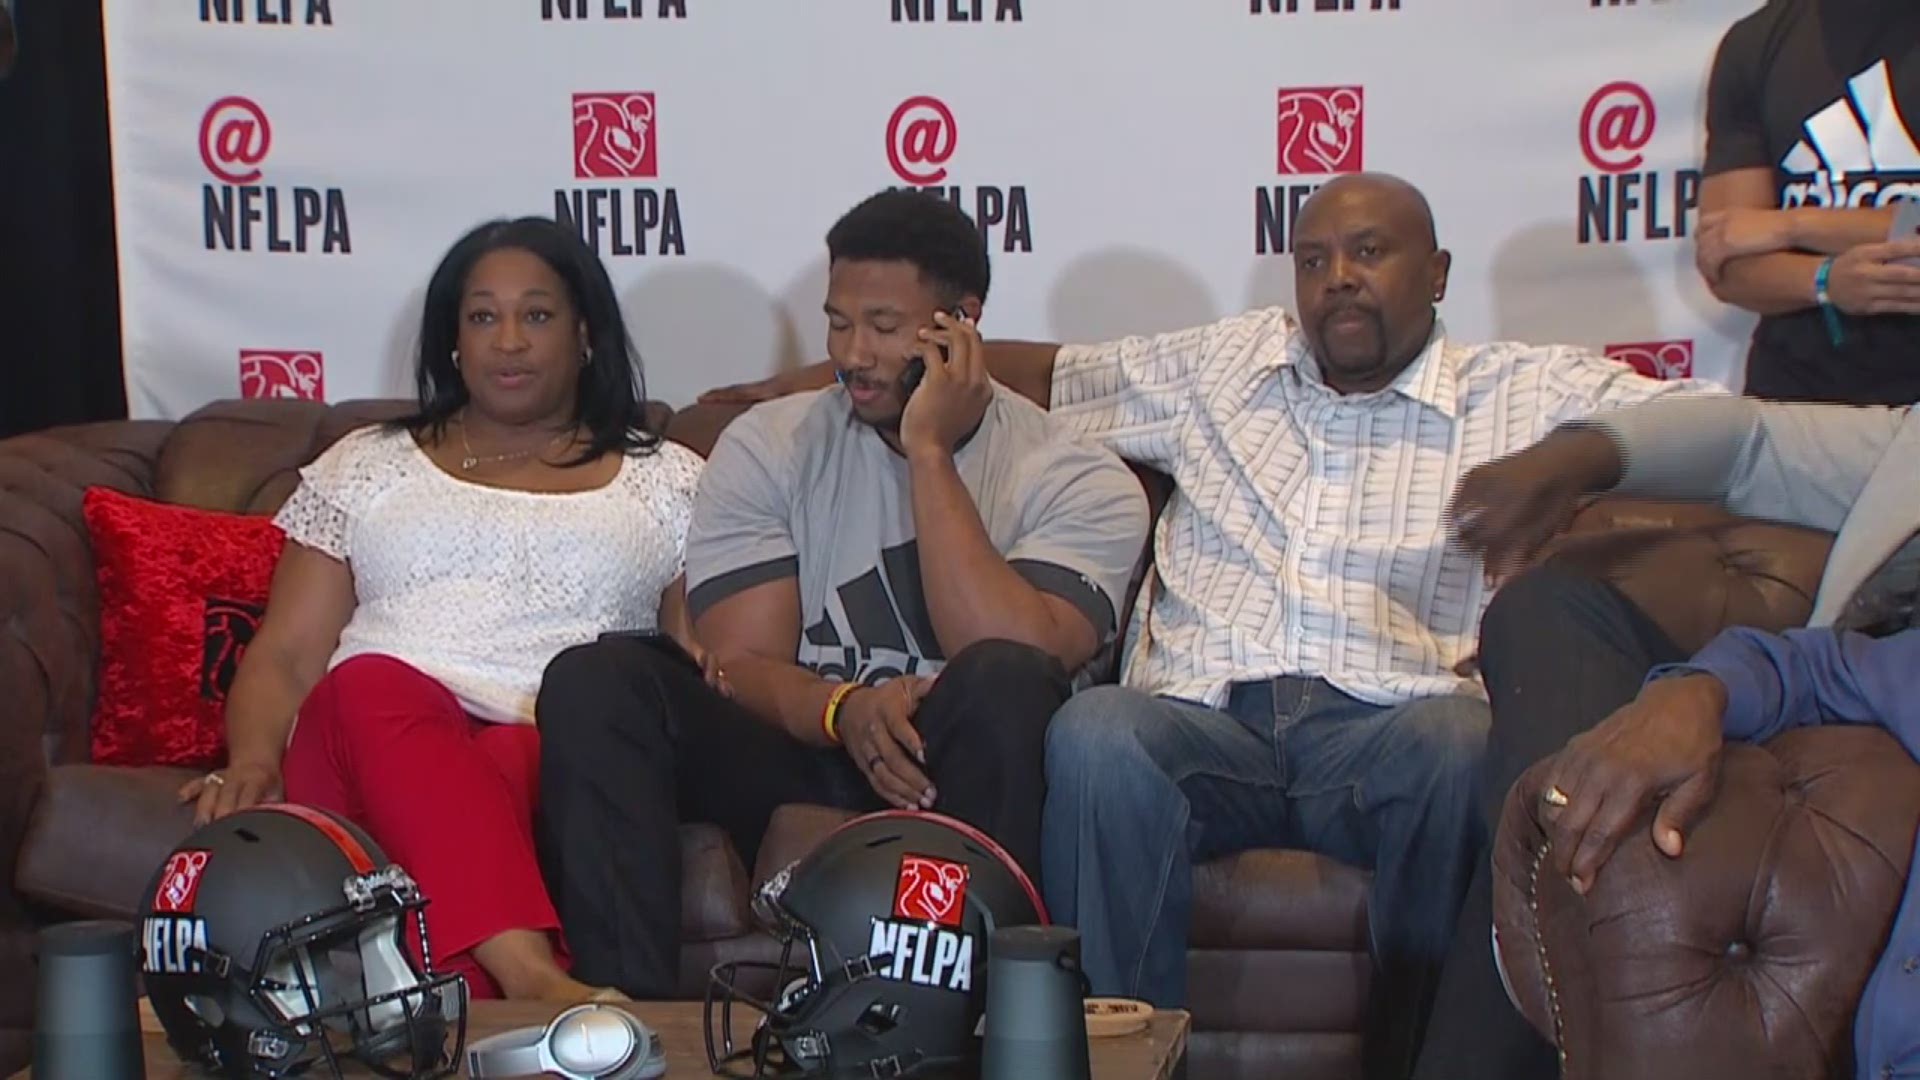 WFAA Sports' cameras were rolling at the Arlington watch party where Myles Garrett and his family celebrated his becoming the No. 1 pick in the 2017 Draft.